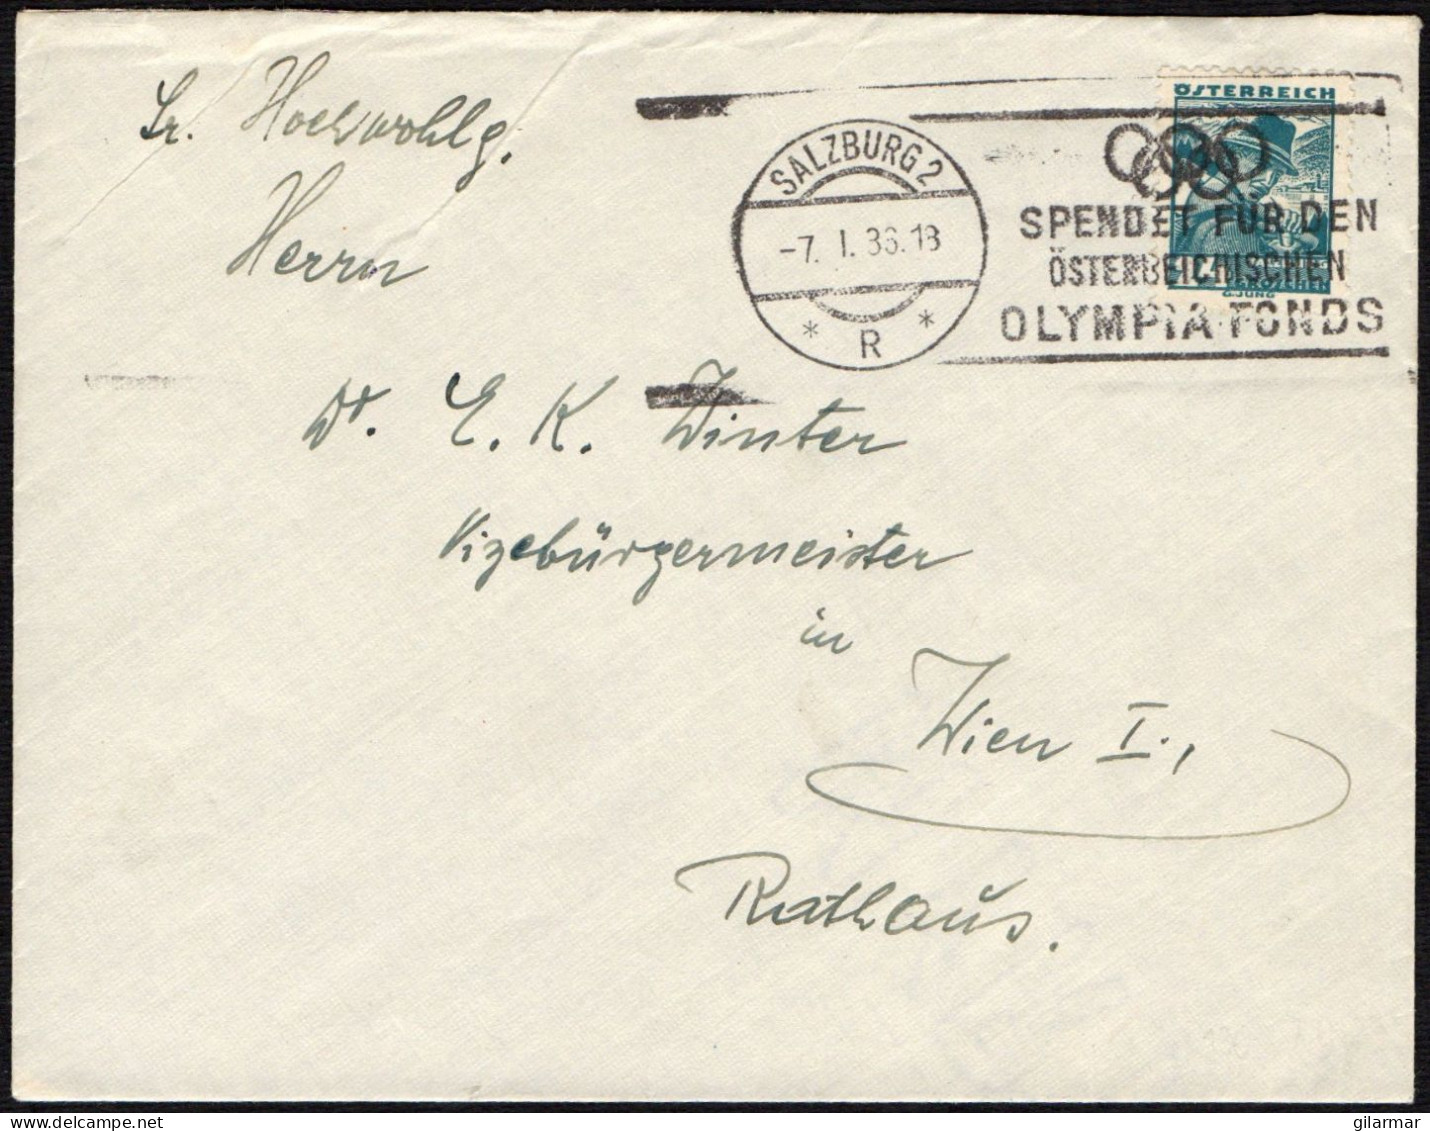 OLYMPIC GAMES 1936 - AUSTRIA SALZBURG 1936 - DONATE TO THE AUSTRIAN OLYMPIC FUND - MAILED ENVELOPE - M - Summer 1936: Berlin